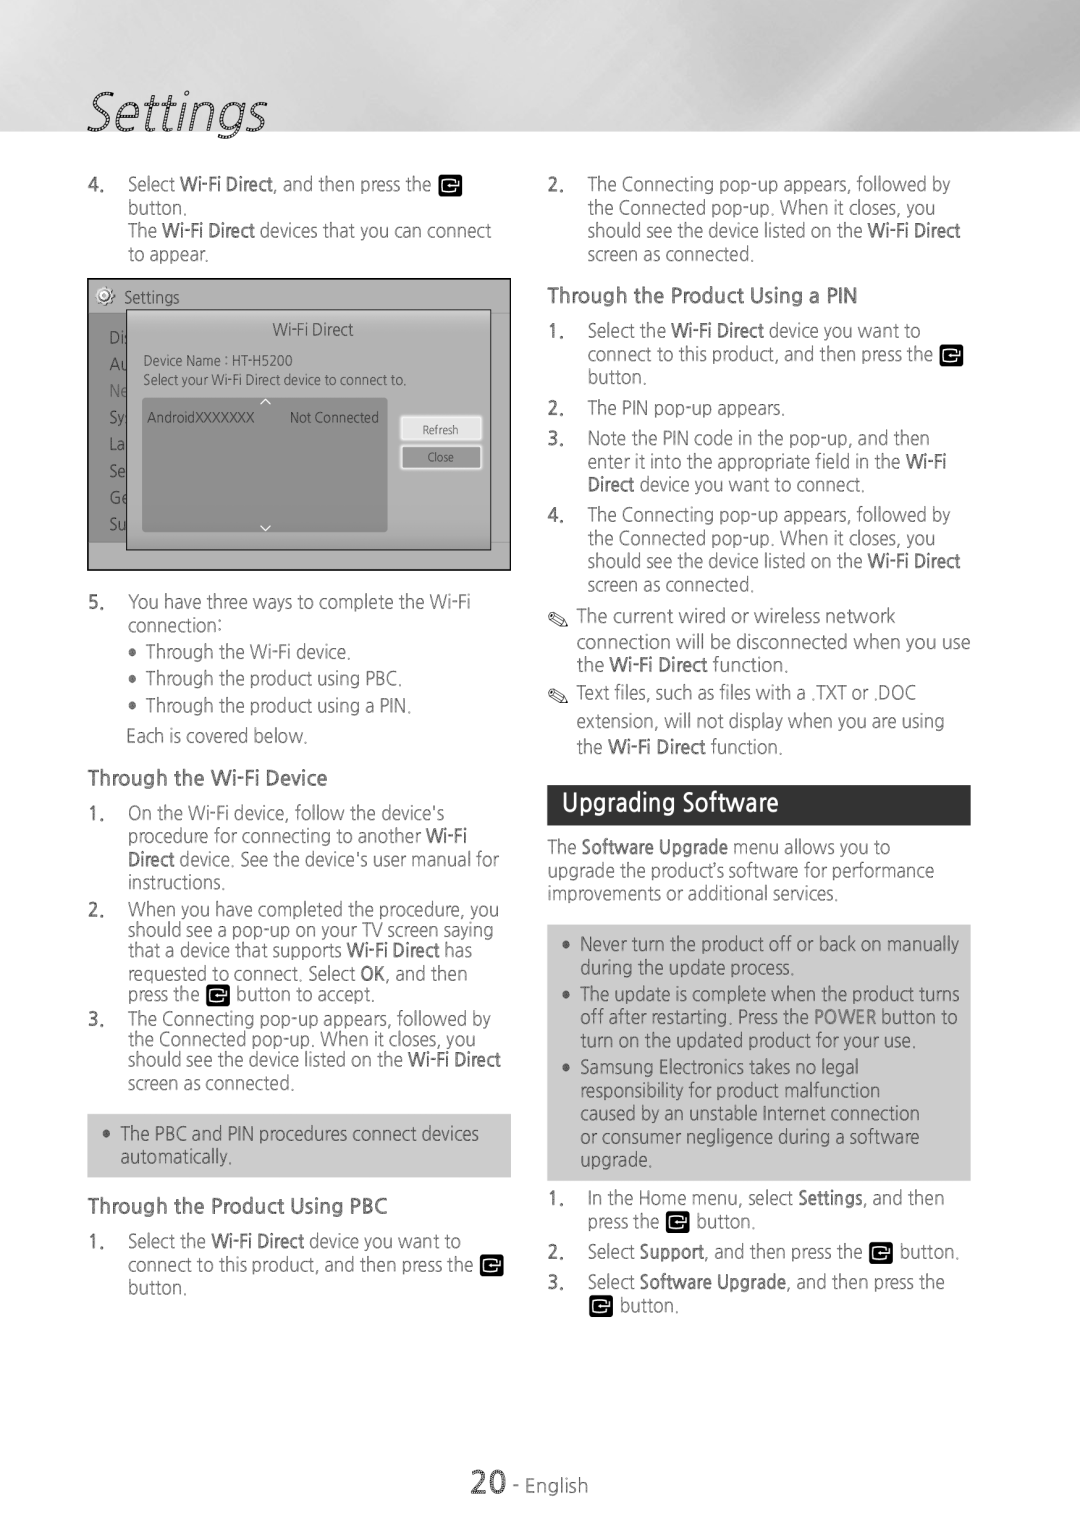 Samsung HT-H5200, HT-HS5200 user manual Upgrading Software, Through the Wi-FiDevice, Through the Product Using PBC, Settings 